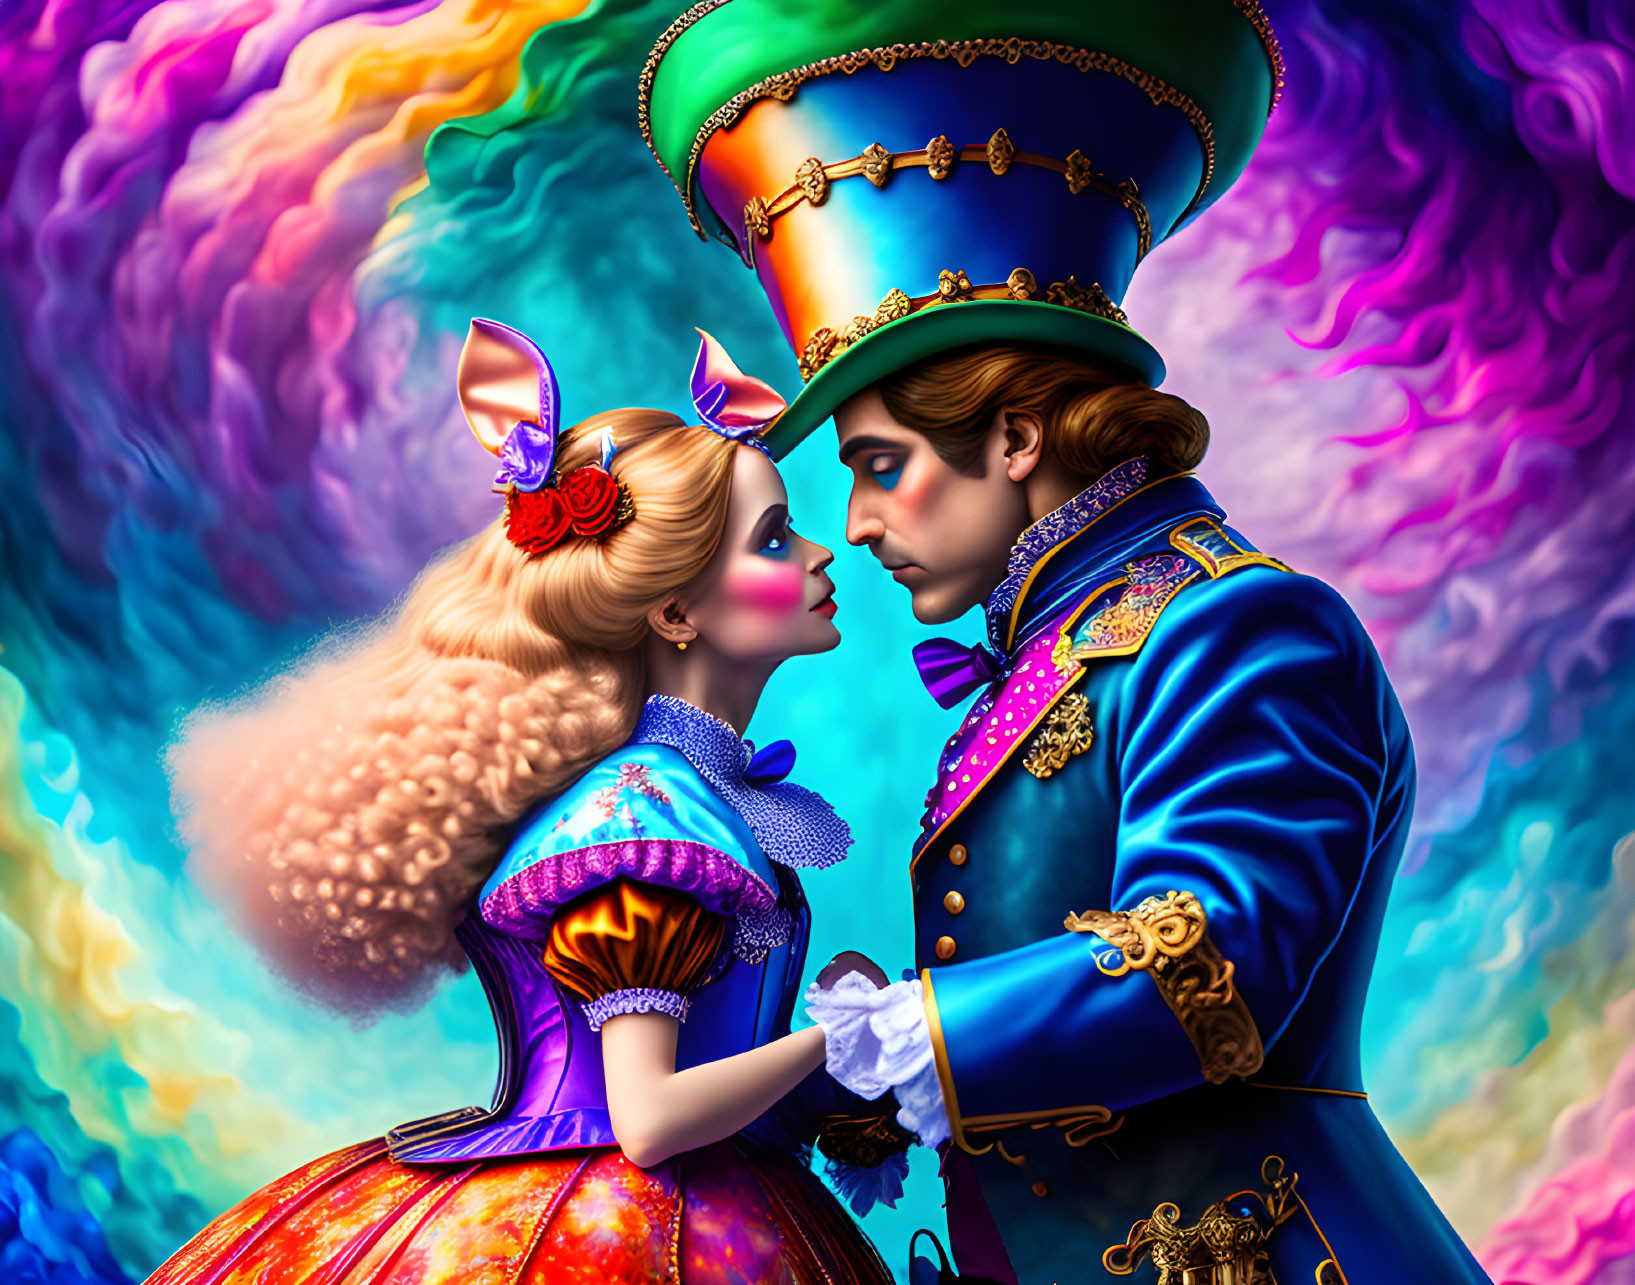 Alice in Wonderland and the Mad Hatter